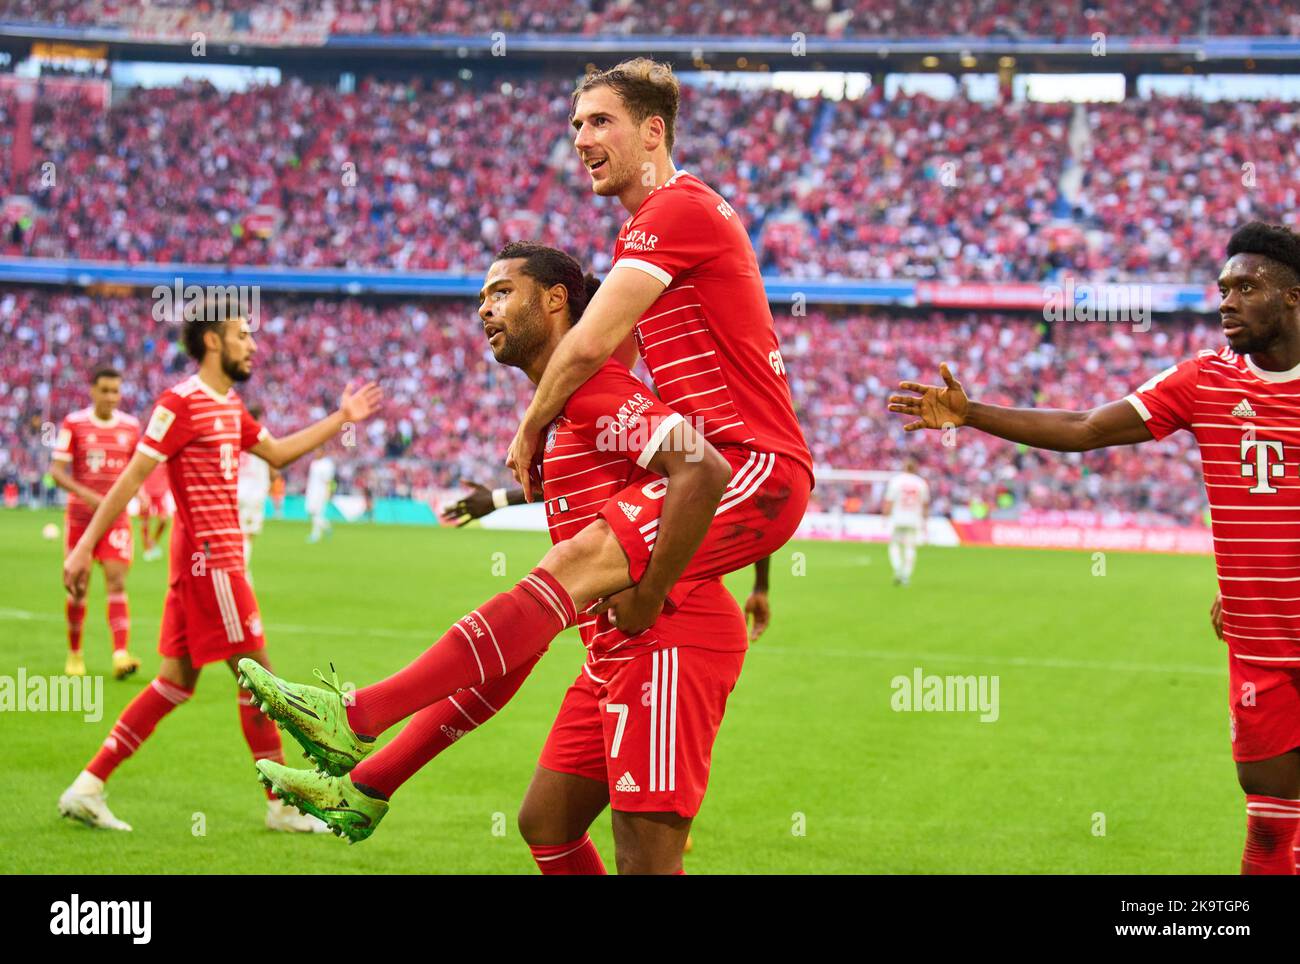 Germany. 29th Oct, 2022. Leon GORETZKA, FCB 8 celebrates his goal, happy, laugh, celebration, 4-1  with Serge GNABRY, FCB 7 and Alphonso DAVIES, FCB 19  in the match FC BAYERN MÜNCHEN - 1. FSV MAINZ 05  6-2  1.German Football League on Oct 29, 2022 in Munich, Germany. Season 2022/2023, matchday 12, 1.Bundesliga, FCB, München, 12.Spieltag © Peter Schatz / Alamy Live News    - DFL REGULATIONS PROHIBIT ANY USE OF PHOTOGRAPHS as IMAGE SEQUENCES and/or QUASI-VIDEO - Credit: Peter Schatz/Alamy Live News Stock Photo